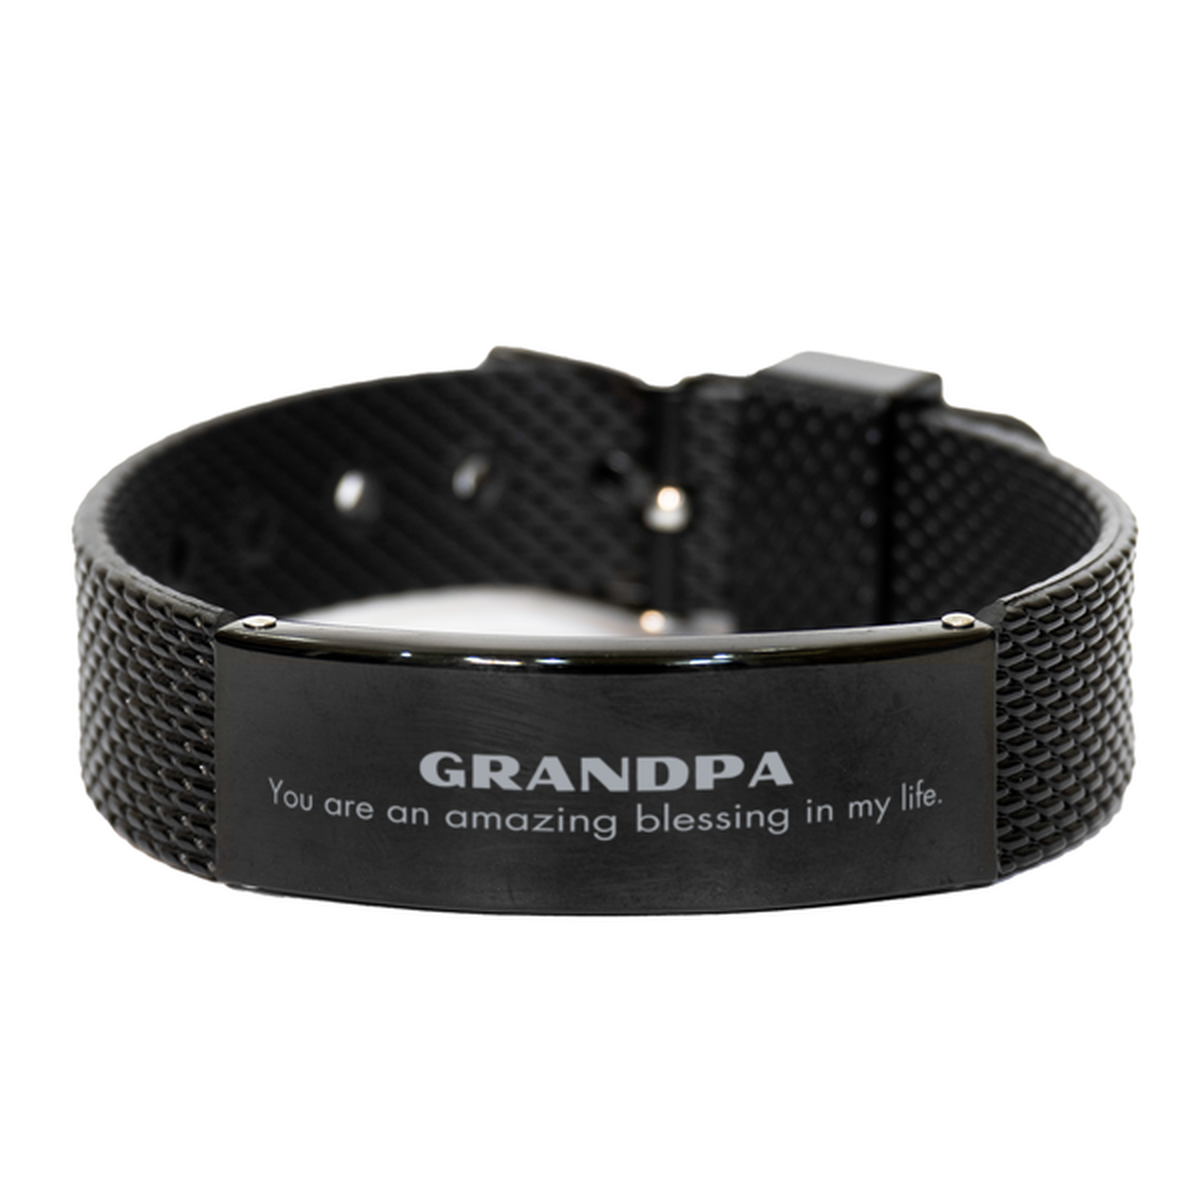 Grandpa Black Shark Mesh Bracelet, You are an amazing blessing in my life, Thank You Gifts For Grandpa, Inspirational Birthday Christmas Unique Gifts For Grandpa